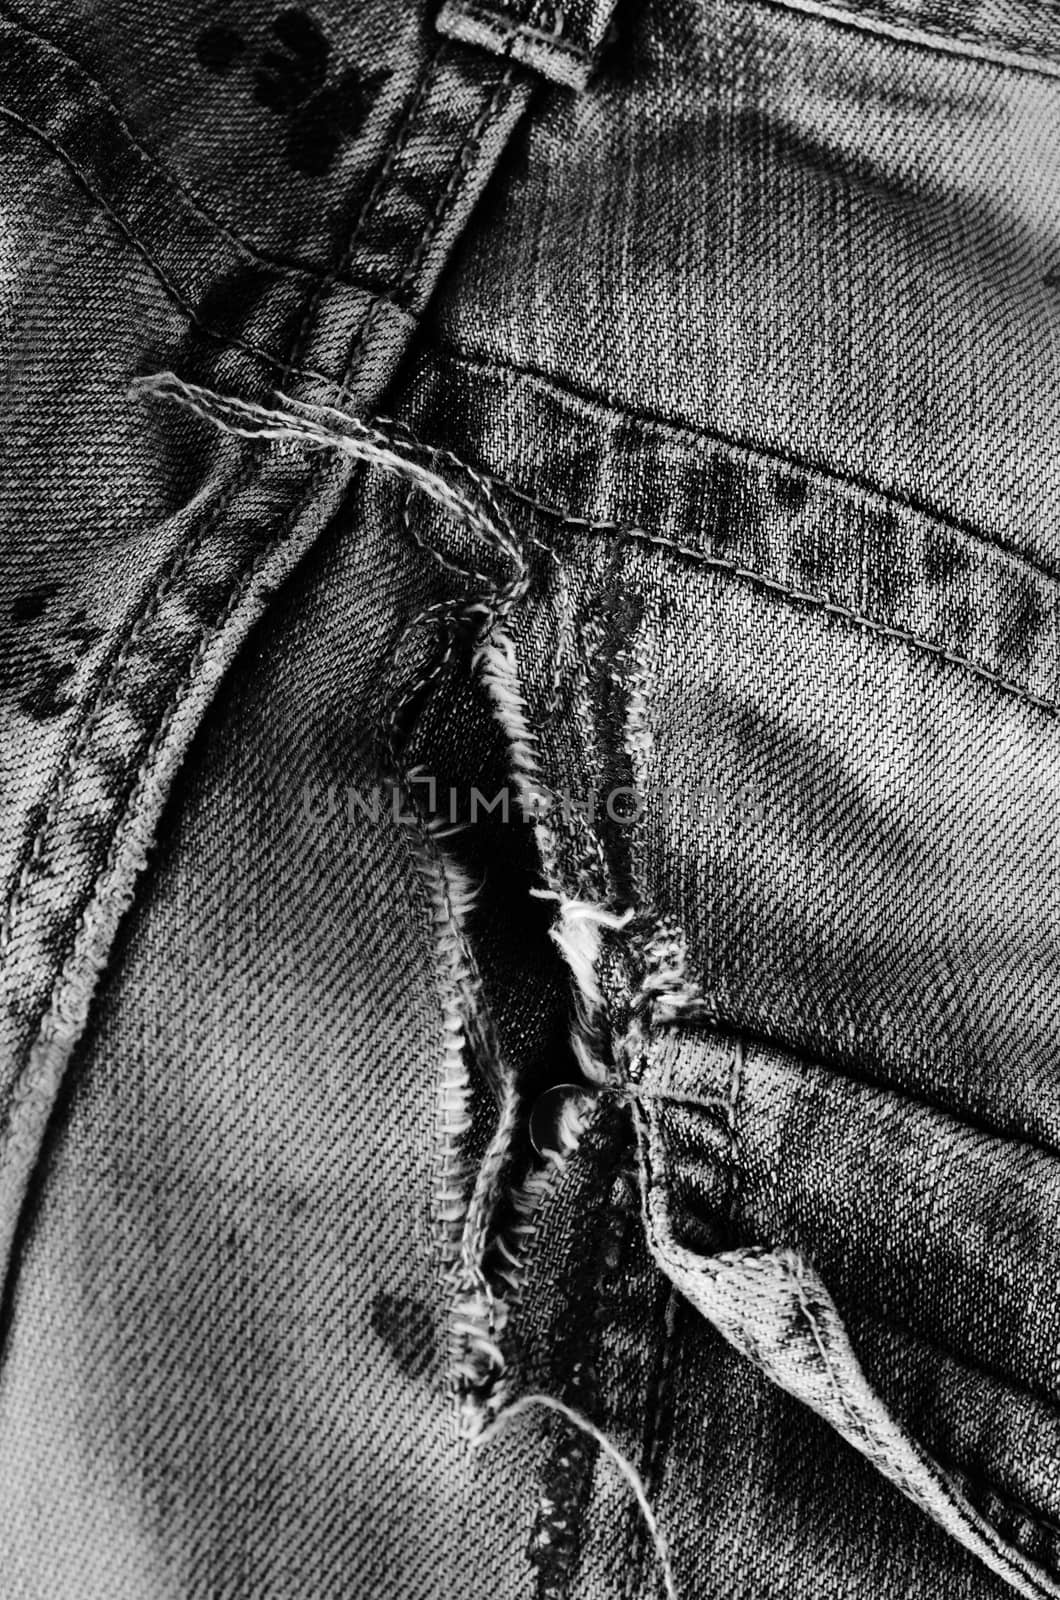 old jeans detail  by sarkao